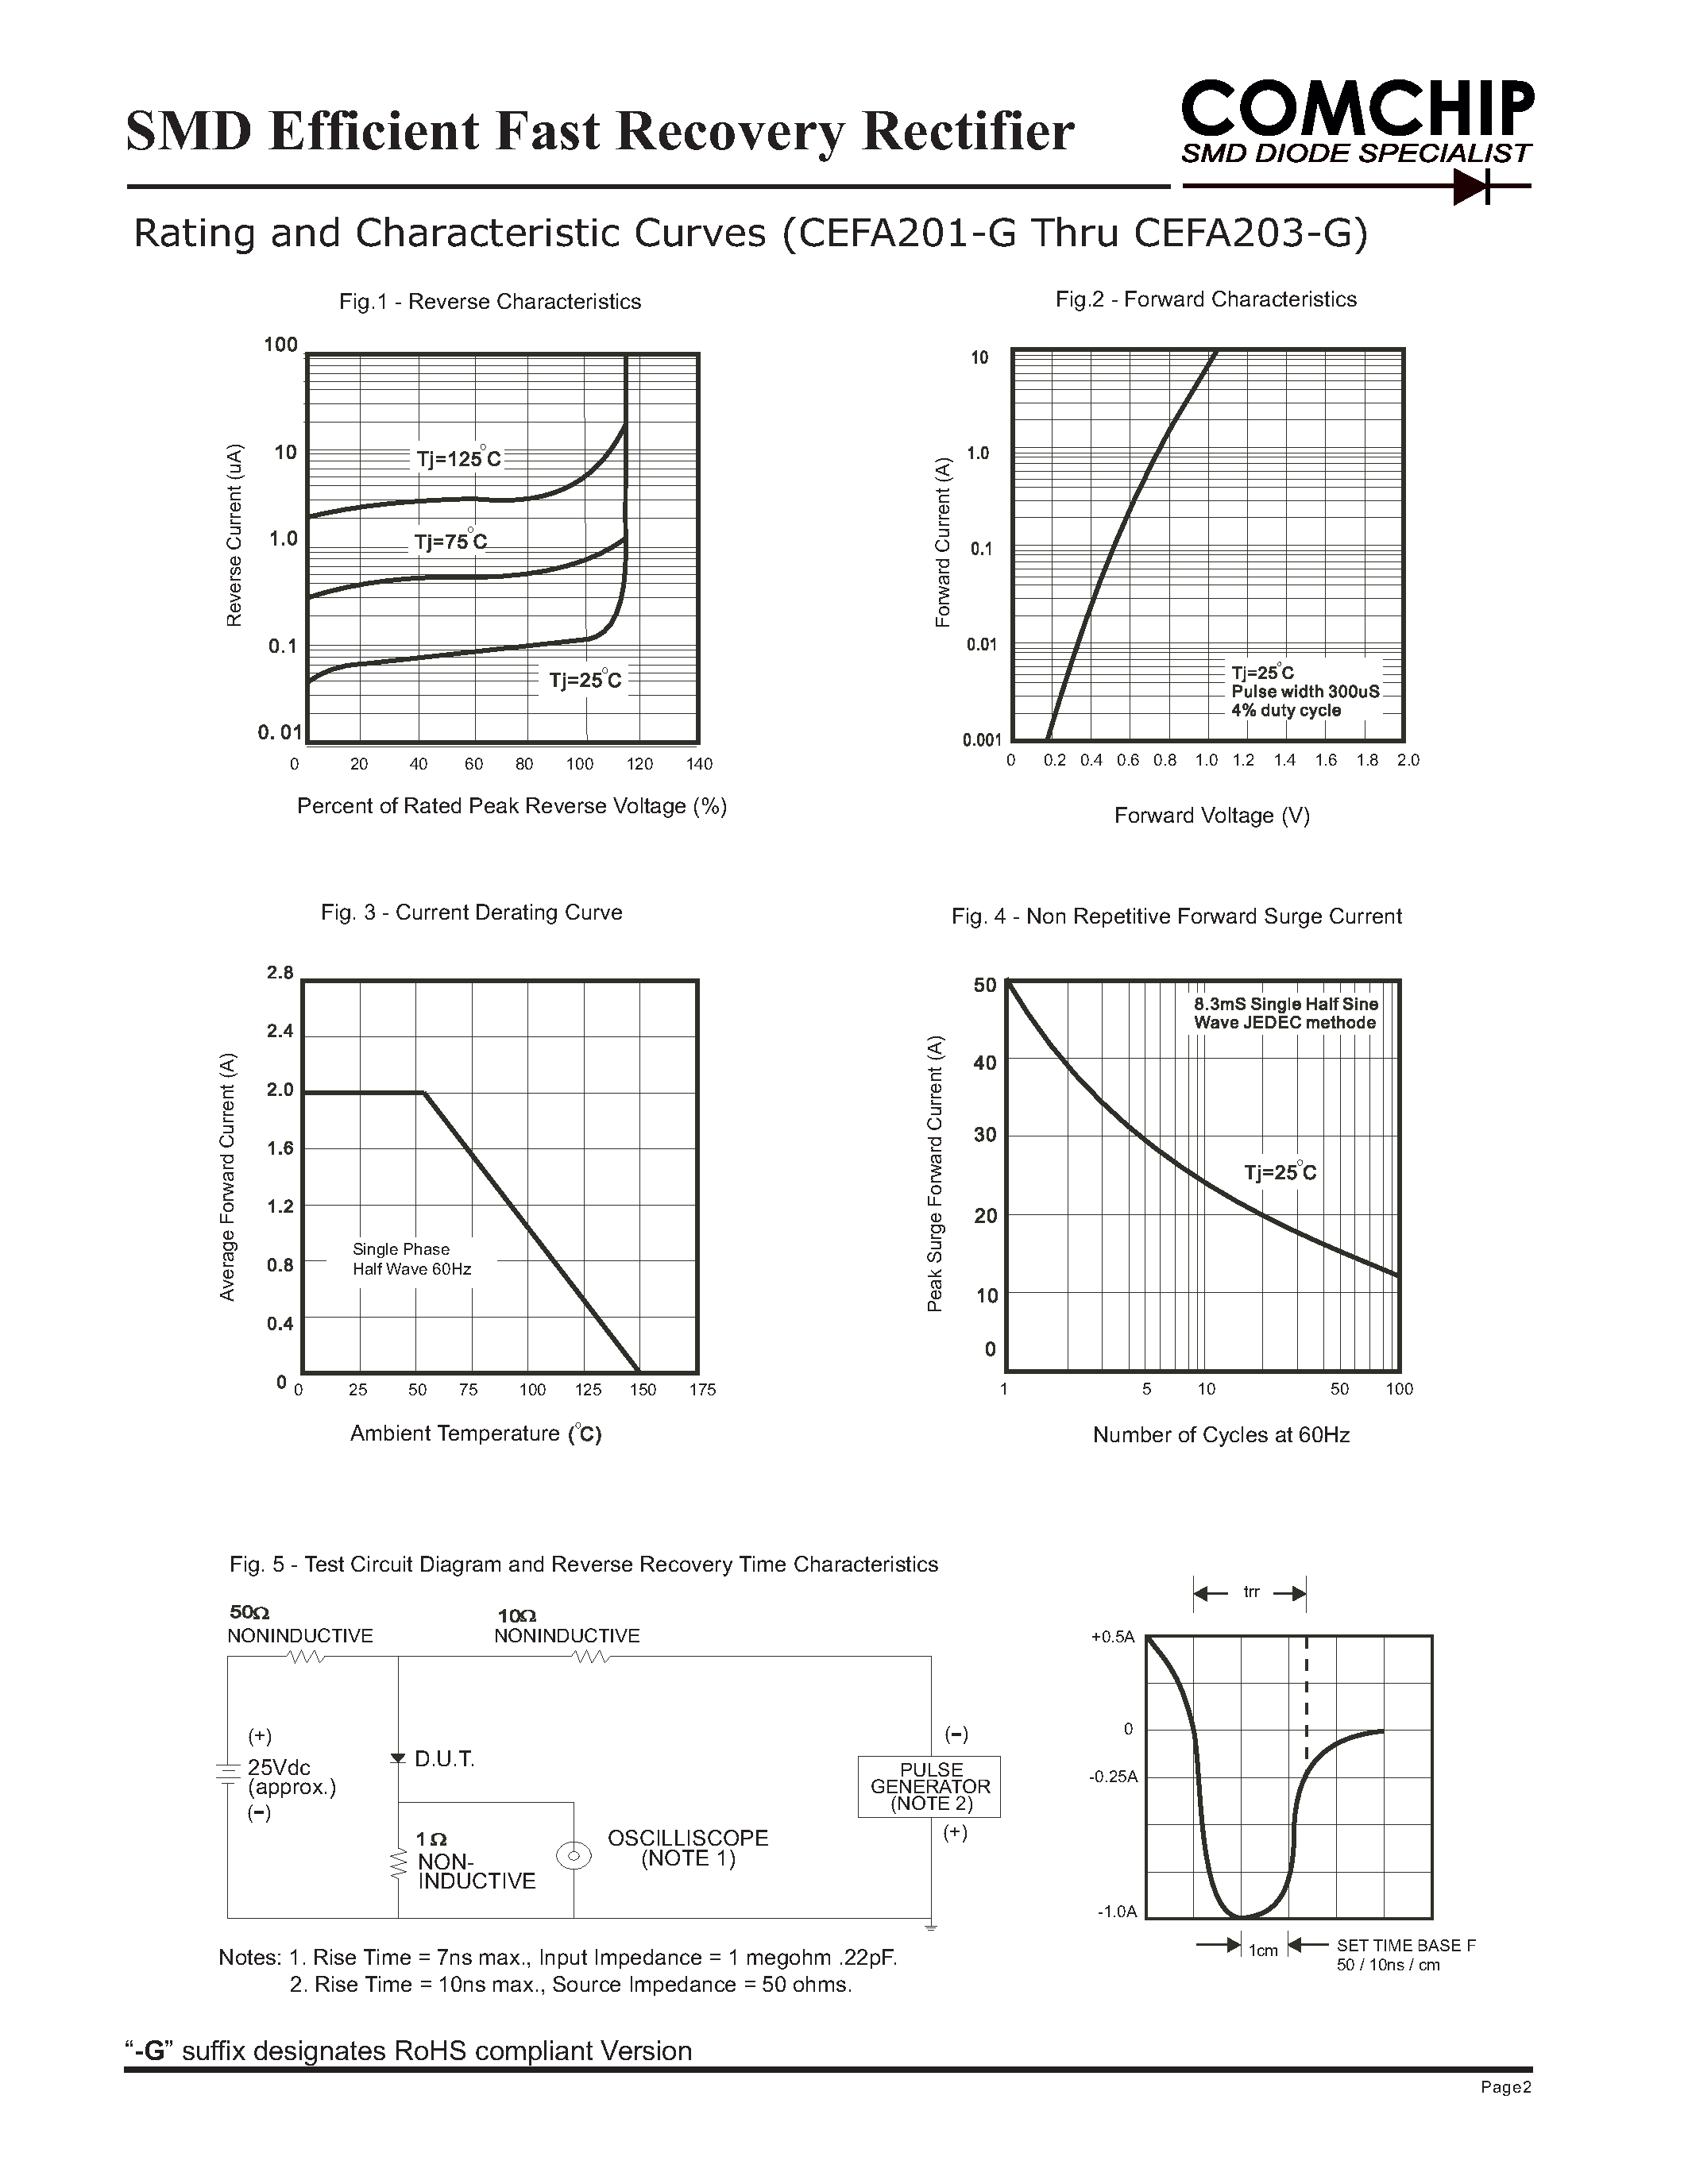 Datasheet CEFA201-G - (CEFA201-G - CEFA203-G) SMD Efficient Fast Recovery Rectifier page 2